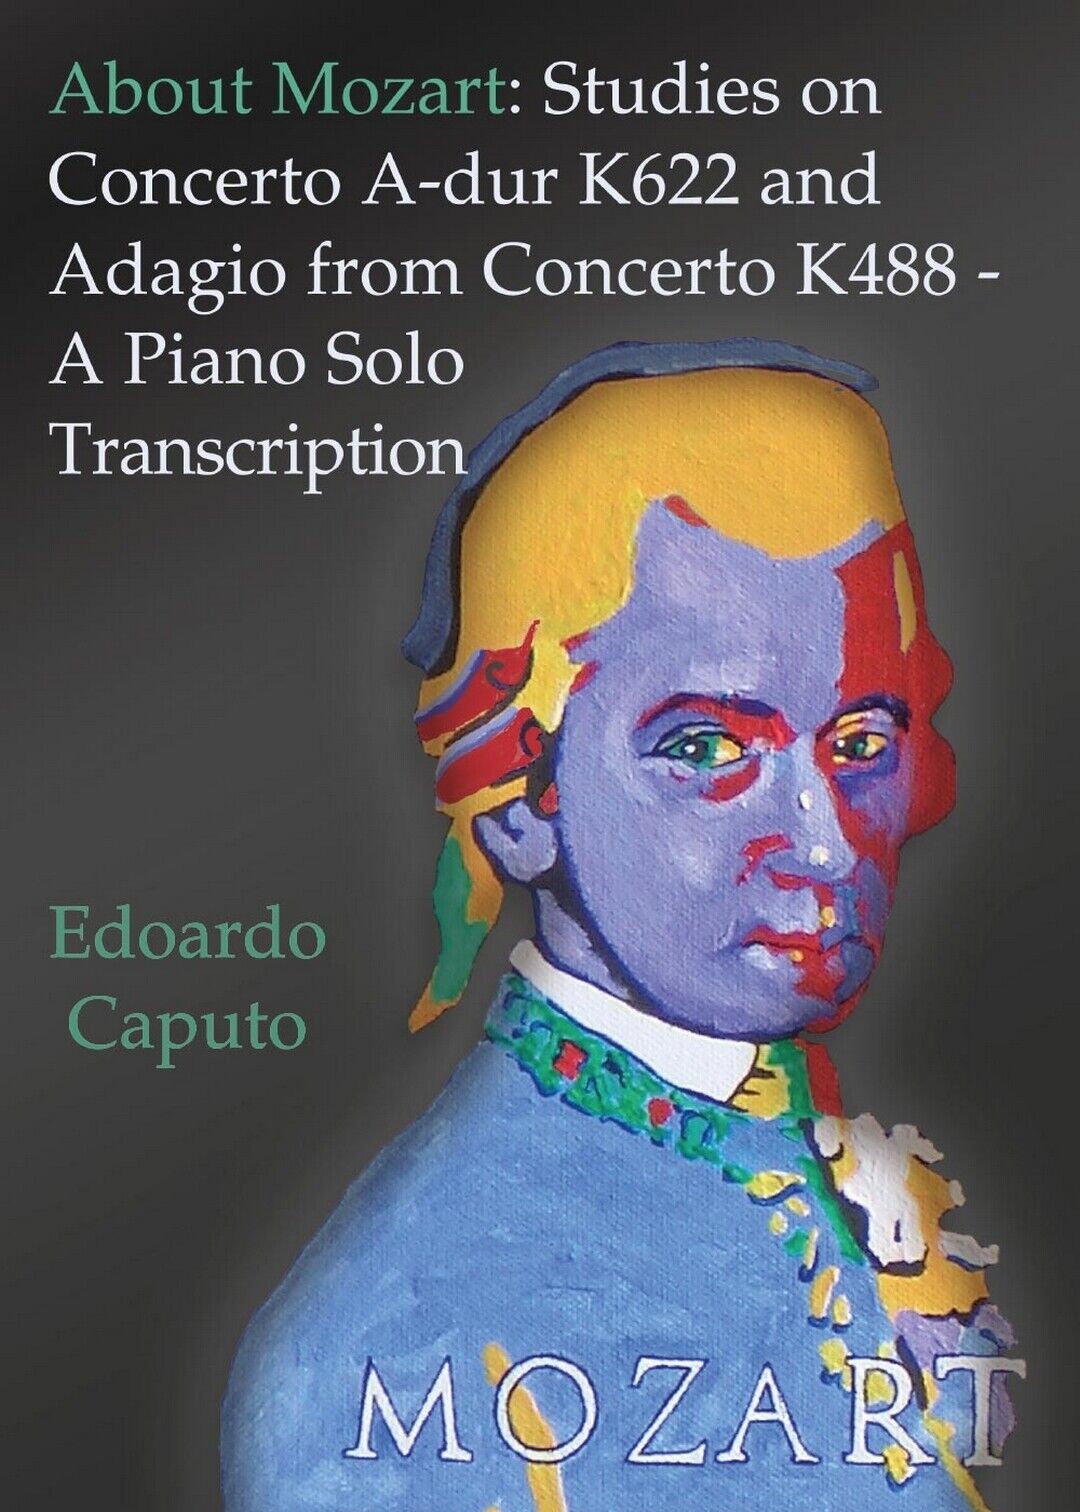 About Mozart: Studies on Concerto A-dur K622 and Adagio from Concerto K488 